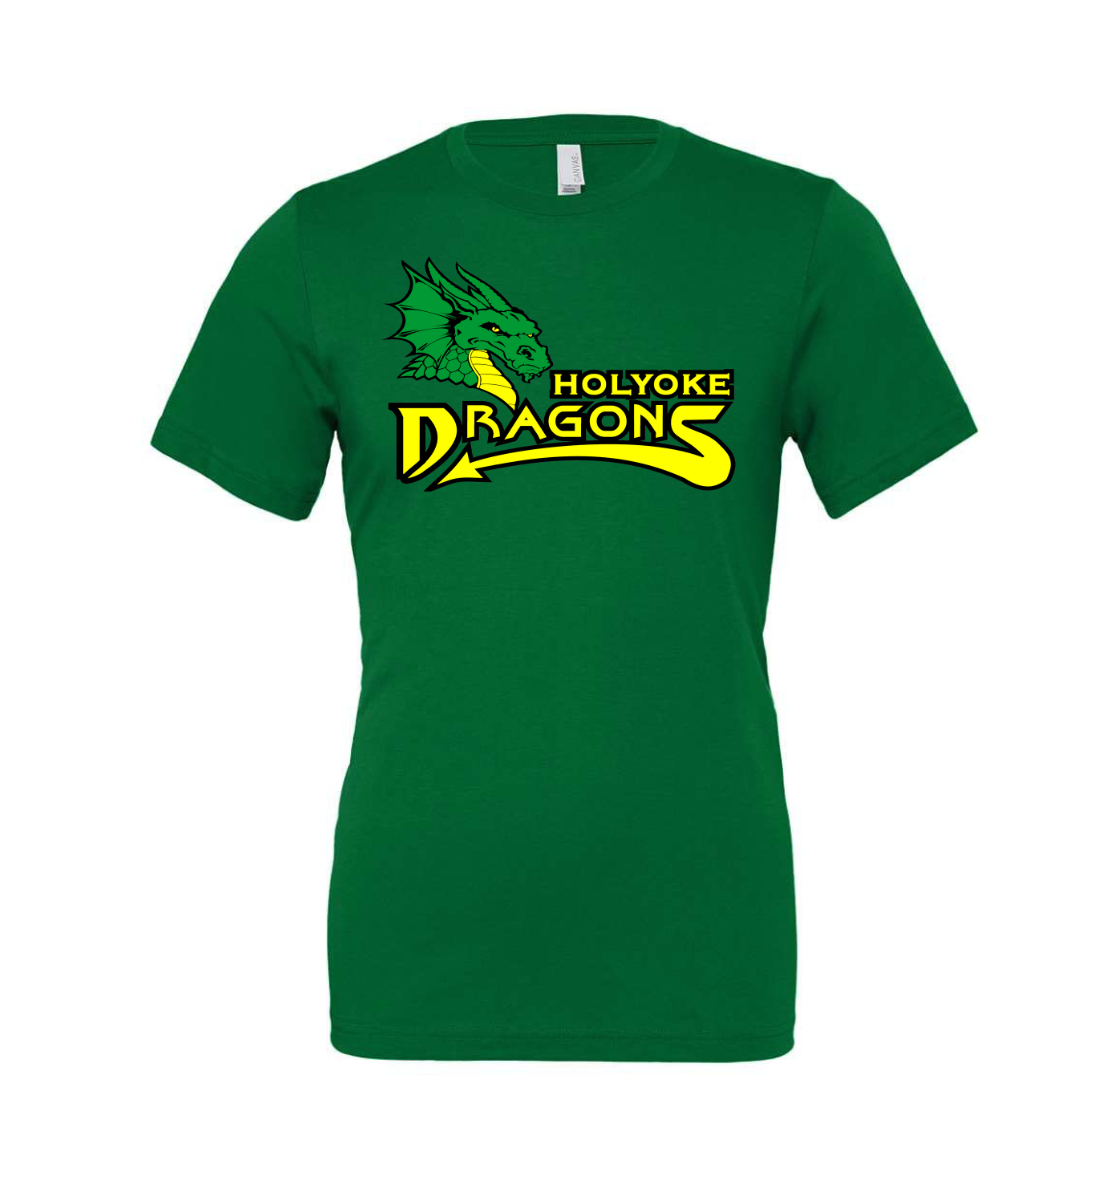 holyoke dragons youth t-shirt: for young dragons fans only!